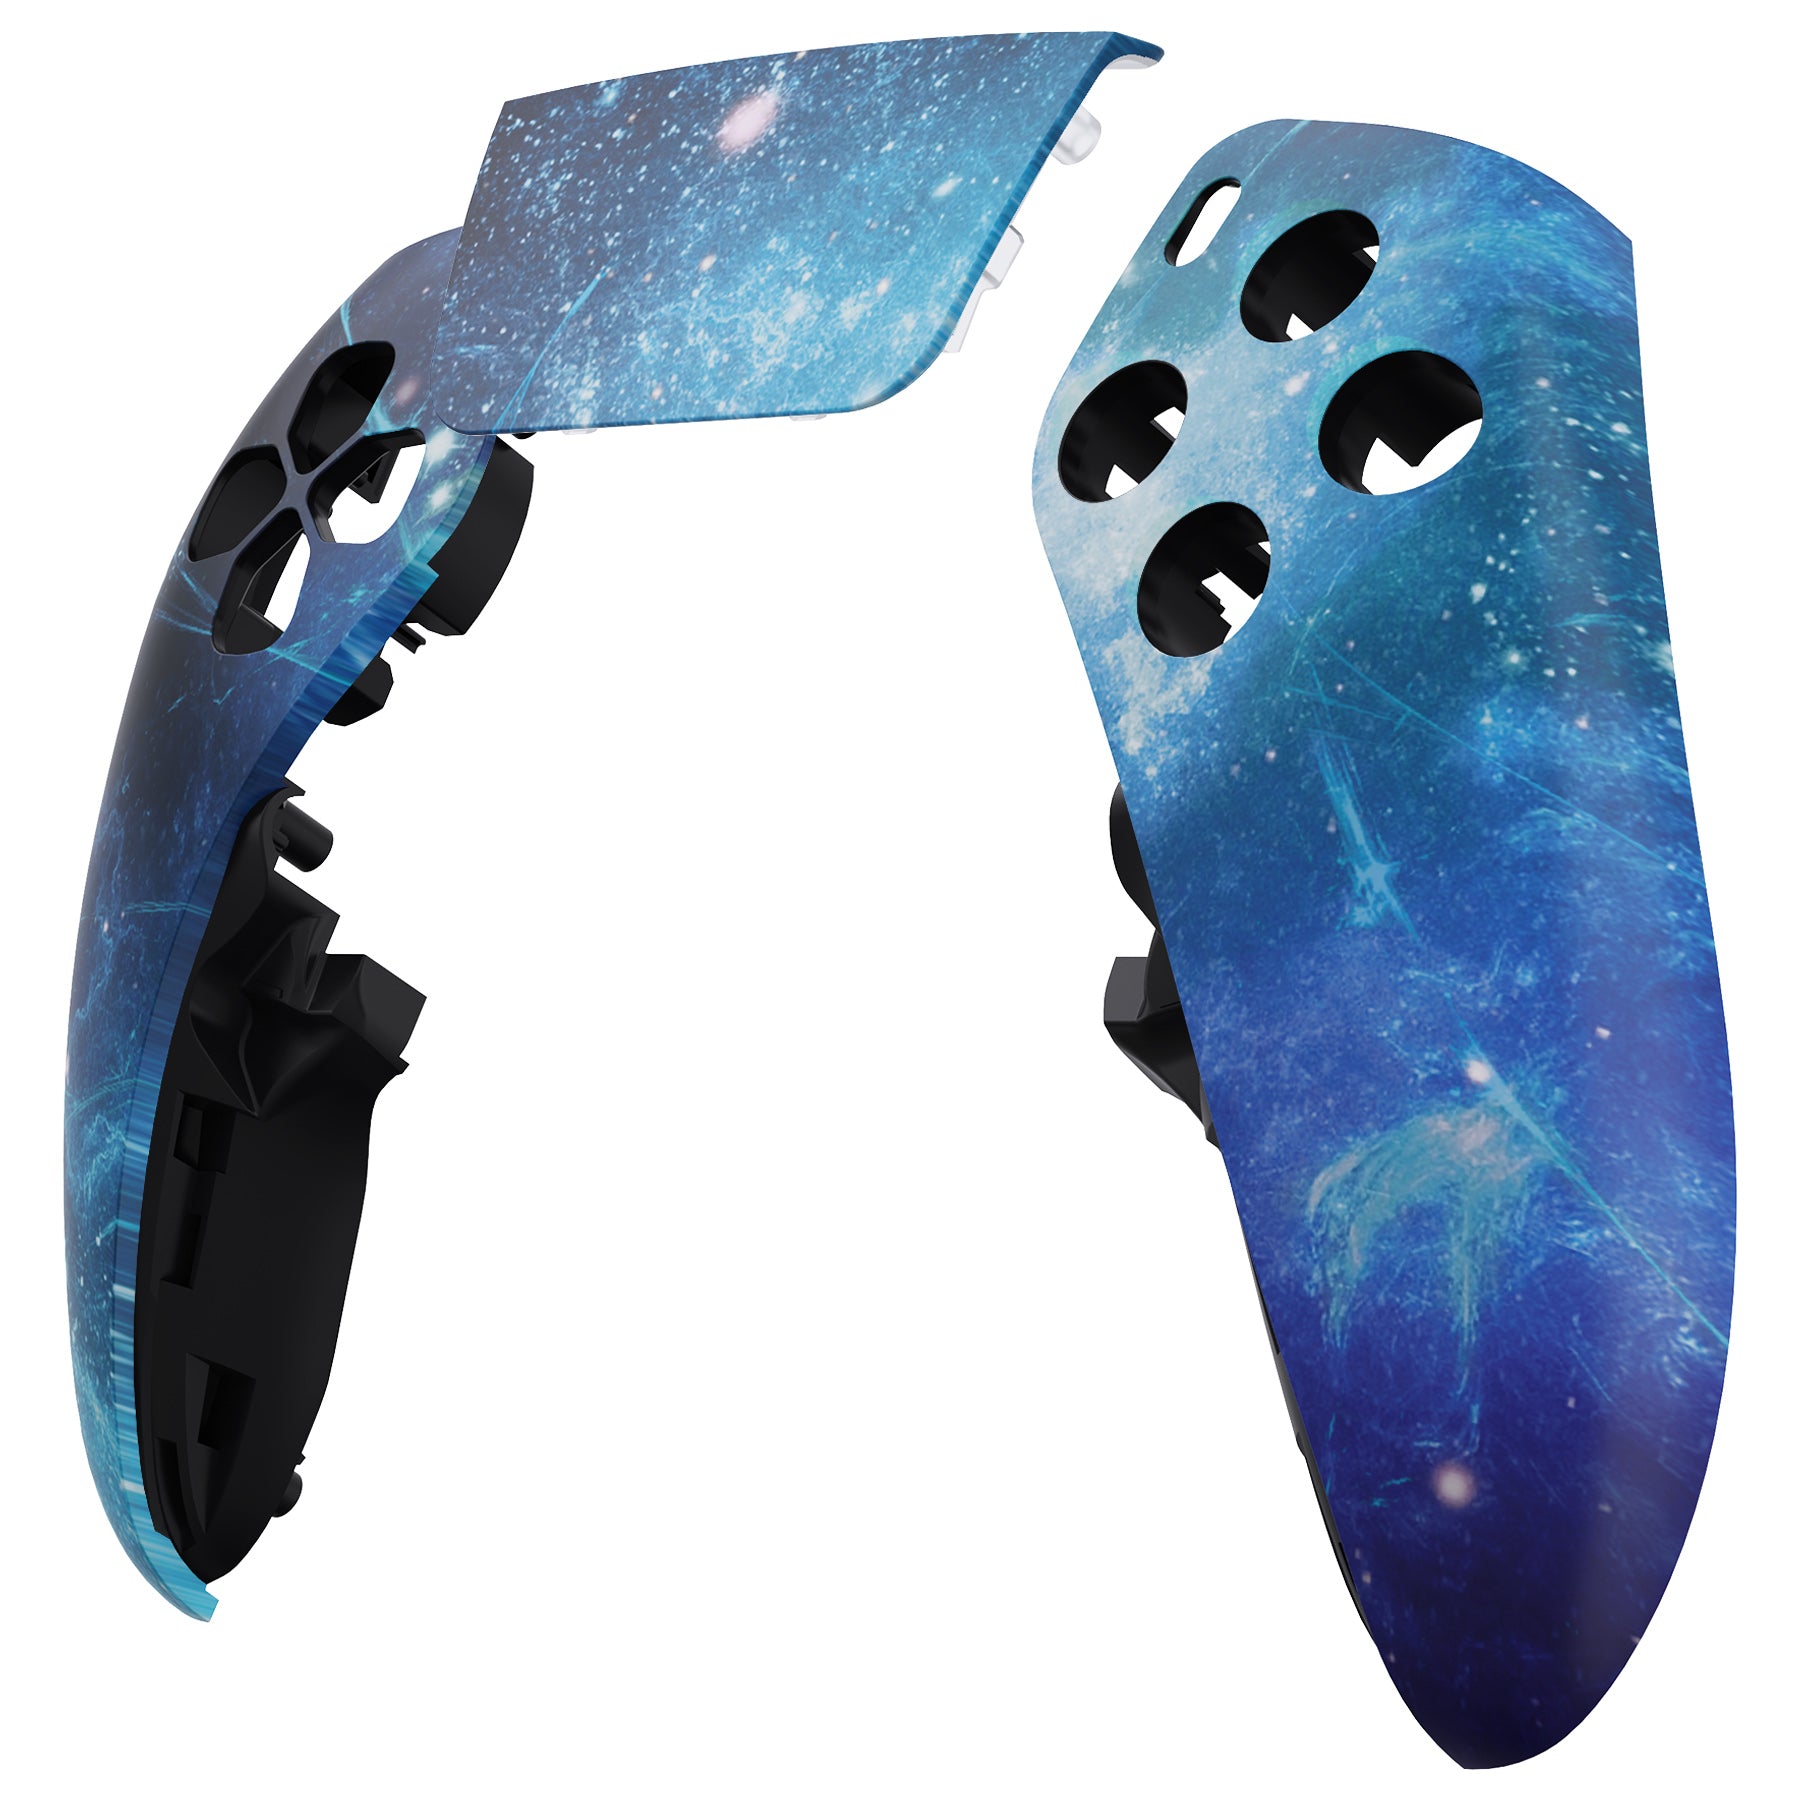 Replacement Left Right Front Housing Shell with Touchpad Compatible with PS5 Edge Controller - Blue Nebula eXtremeRate